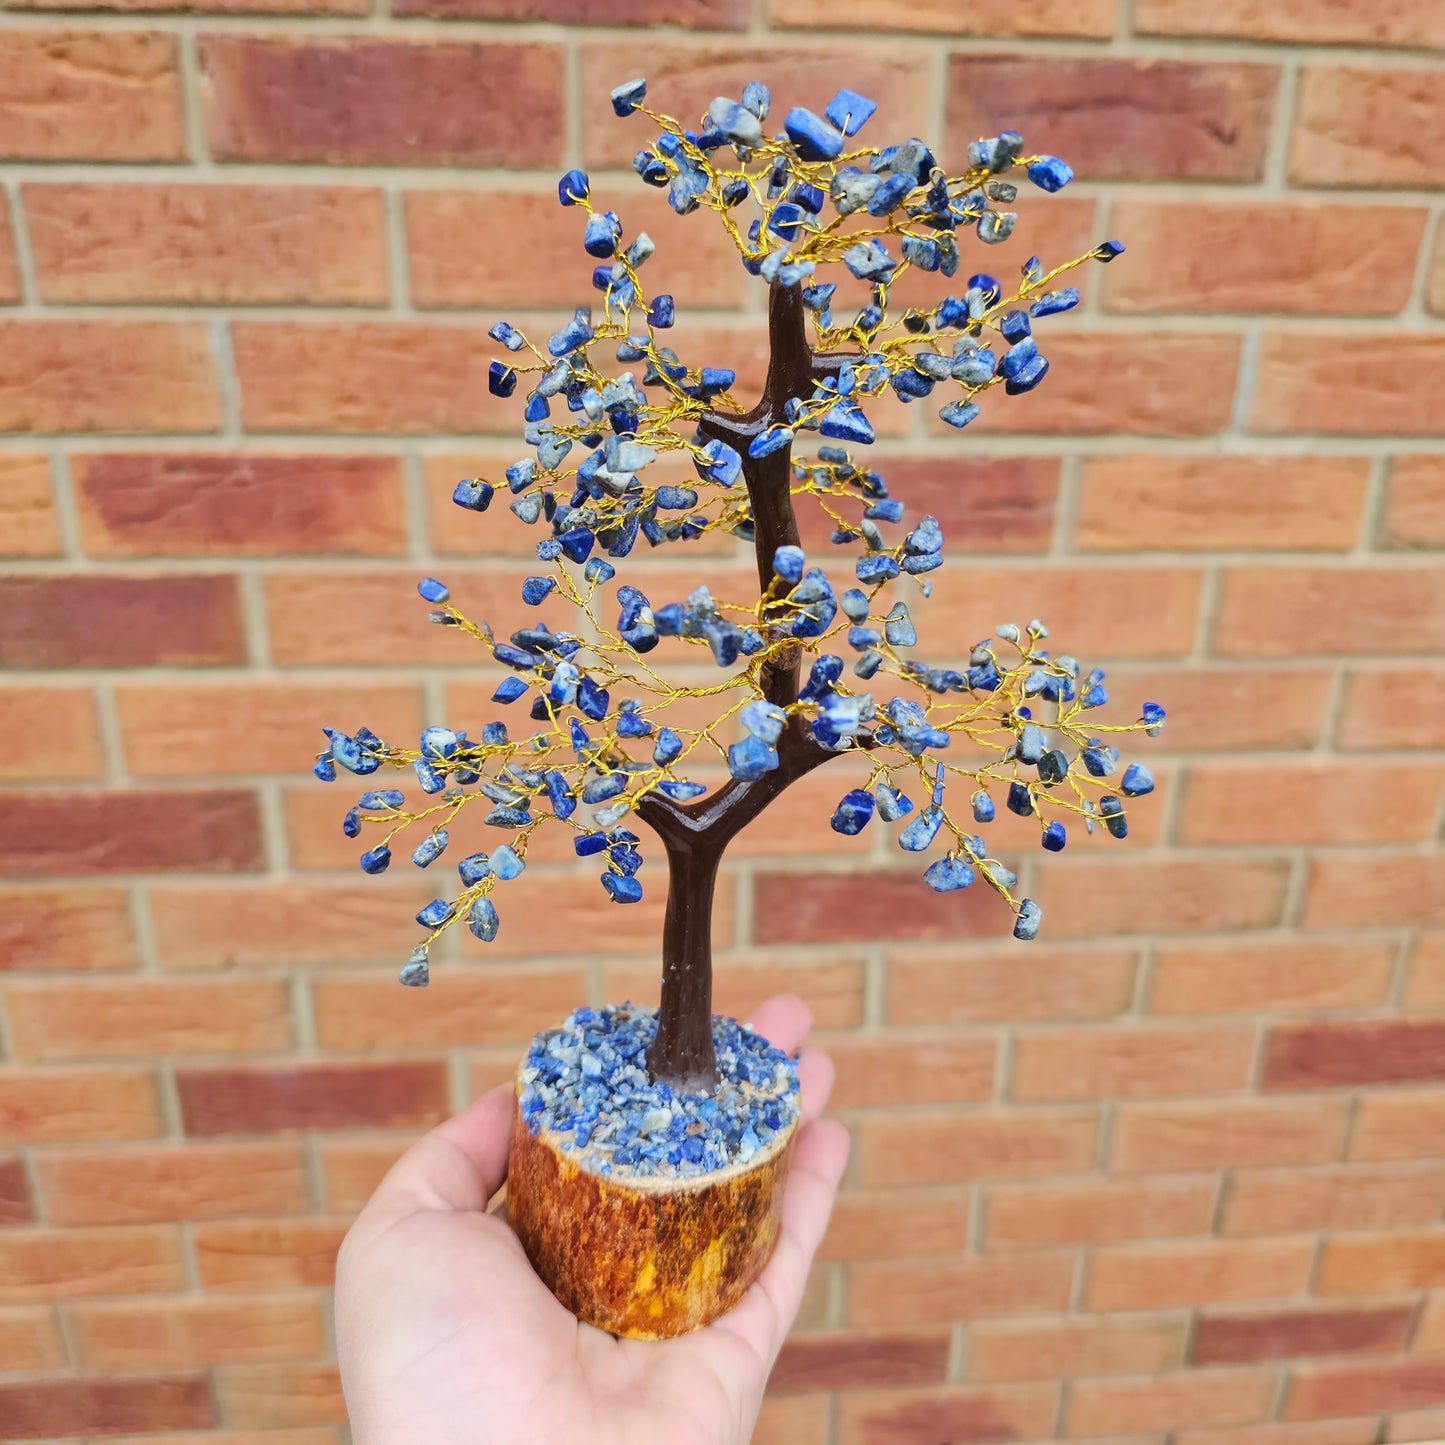 Lapis Lazuli Tree 26cm  | Natural Stone 300 chip beads | Birthday Gifts, Anniversary Gifts, Valentine's Day, Christmas, Easter, Eid, Mother's Day, Diwali, Hannukah, Women's, Girl's, Gifts for her, Gifts for Girlfriend, Gifts for Mom, Gifts for Mum, Gifts for Friend, Handmade Gifts, Handmade Jewelry, New Year's Eve, Graduation, Boho, Hippie, Minimalist, Gemstone, Crystal, Crystal Healing